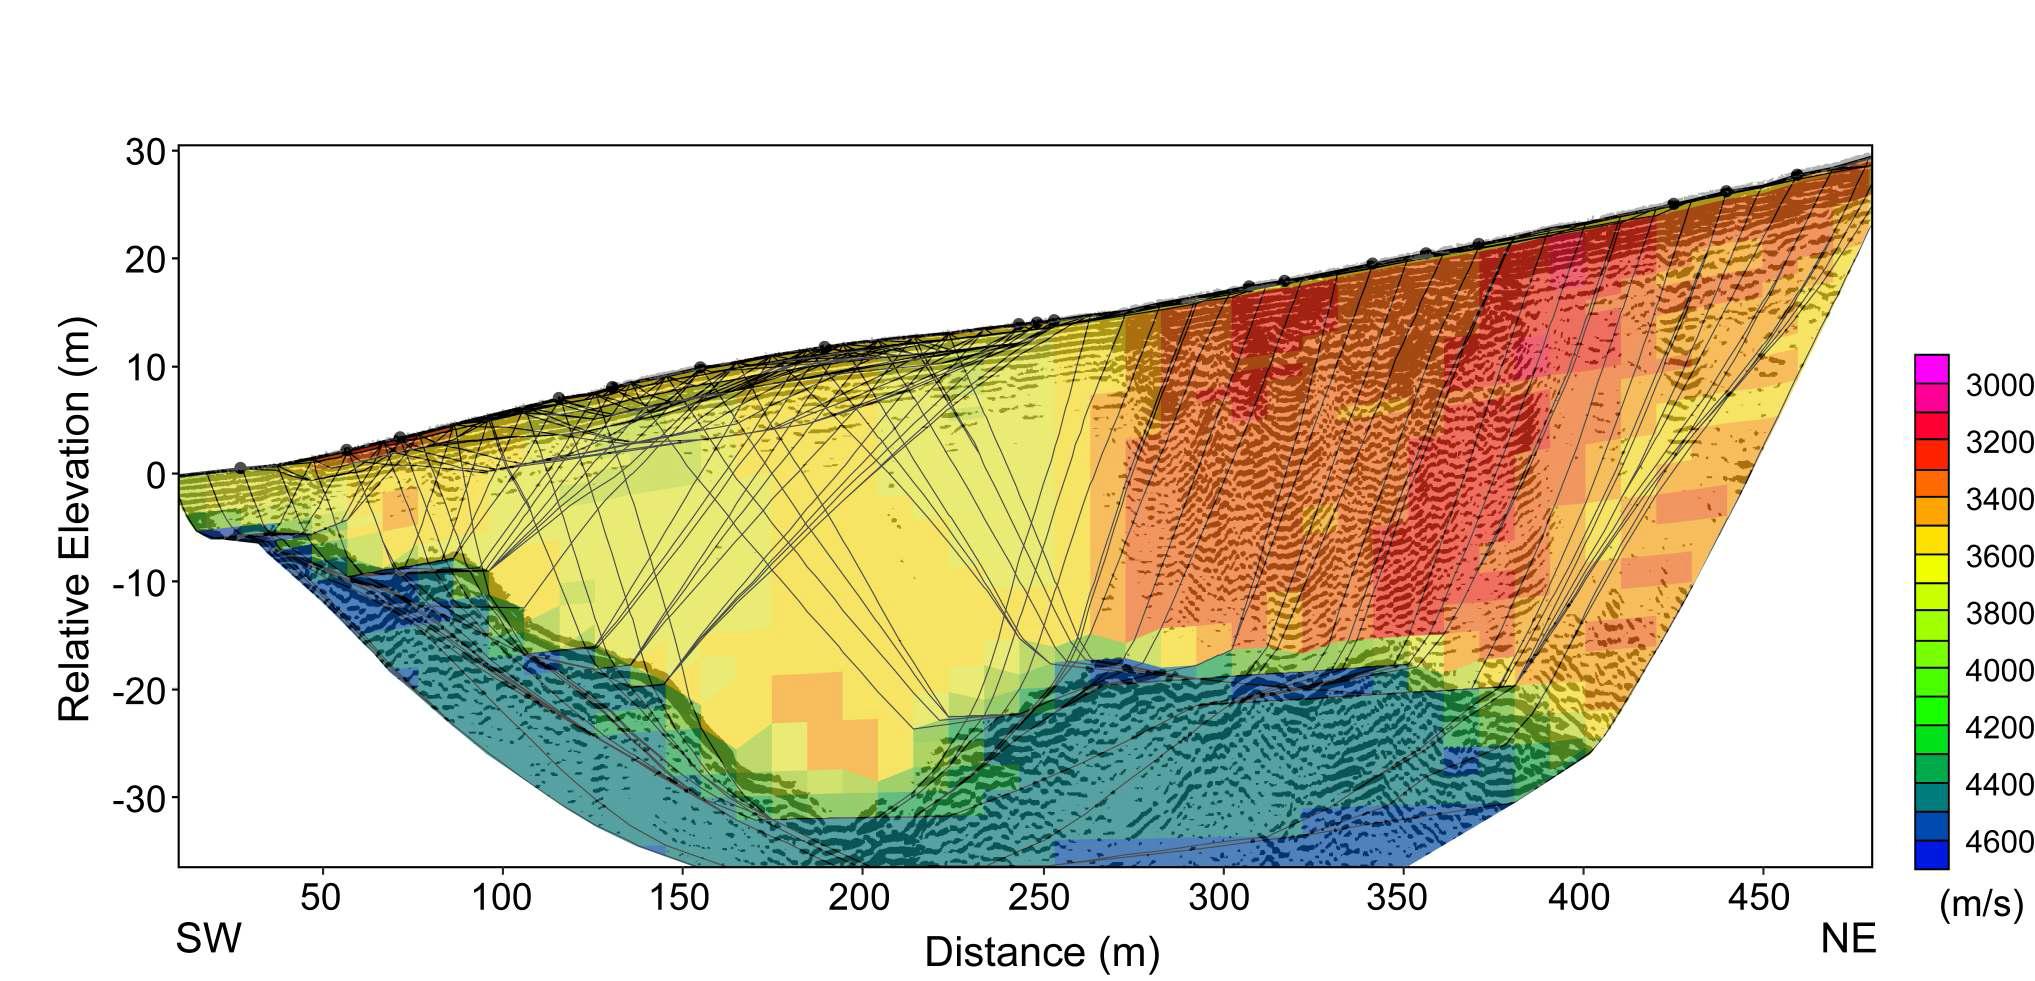 P-wave velocity tomogram for the seismic profile superimposed on the groundpenetrating radar depth-migrated image (Fig. 3b). A distinctive low-velocity region is imaged in the profile distances between 260 and 380 m, where the ice is densely fractured. The 21 shot locations are indicated by dots on the ice surface. Solid lines indicate the modelled raypaths emanating from these shots.